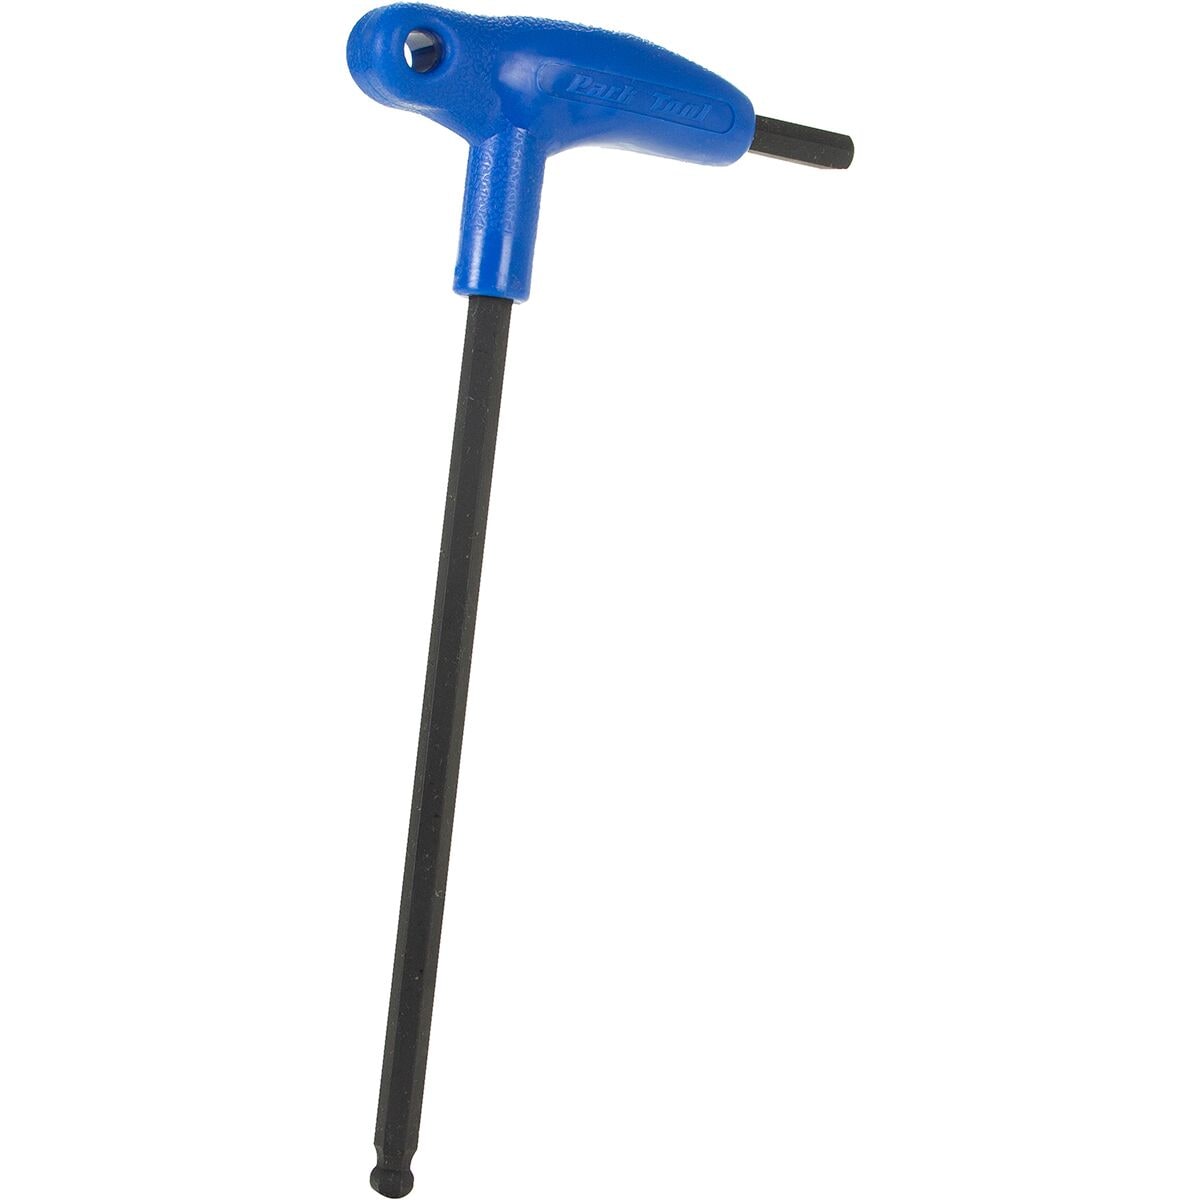 Park Tool PH-1.2 P-Handle Hex Wrench Set 